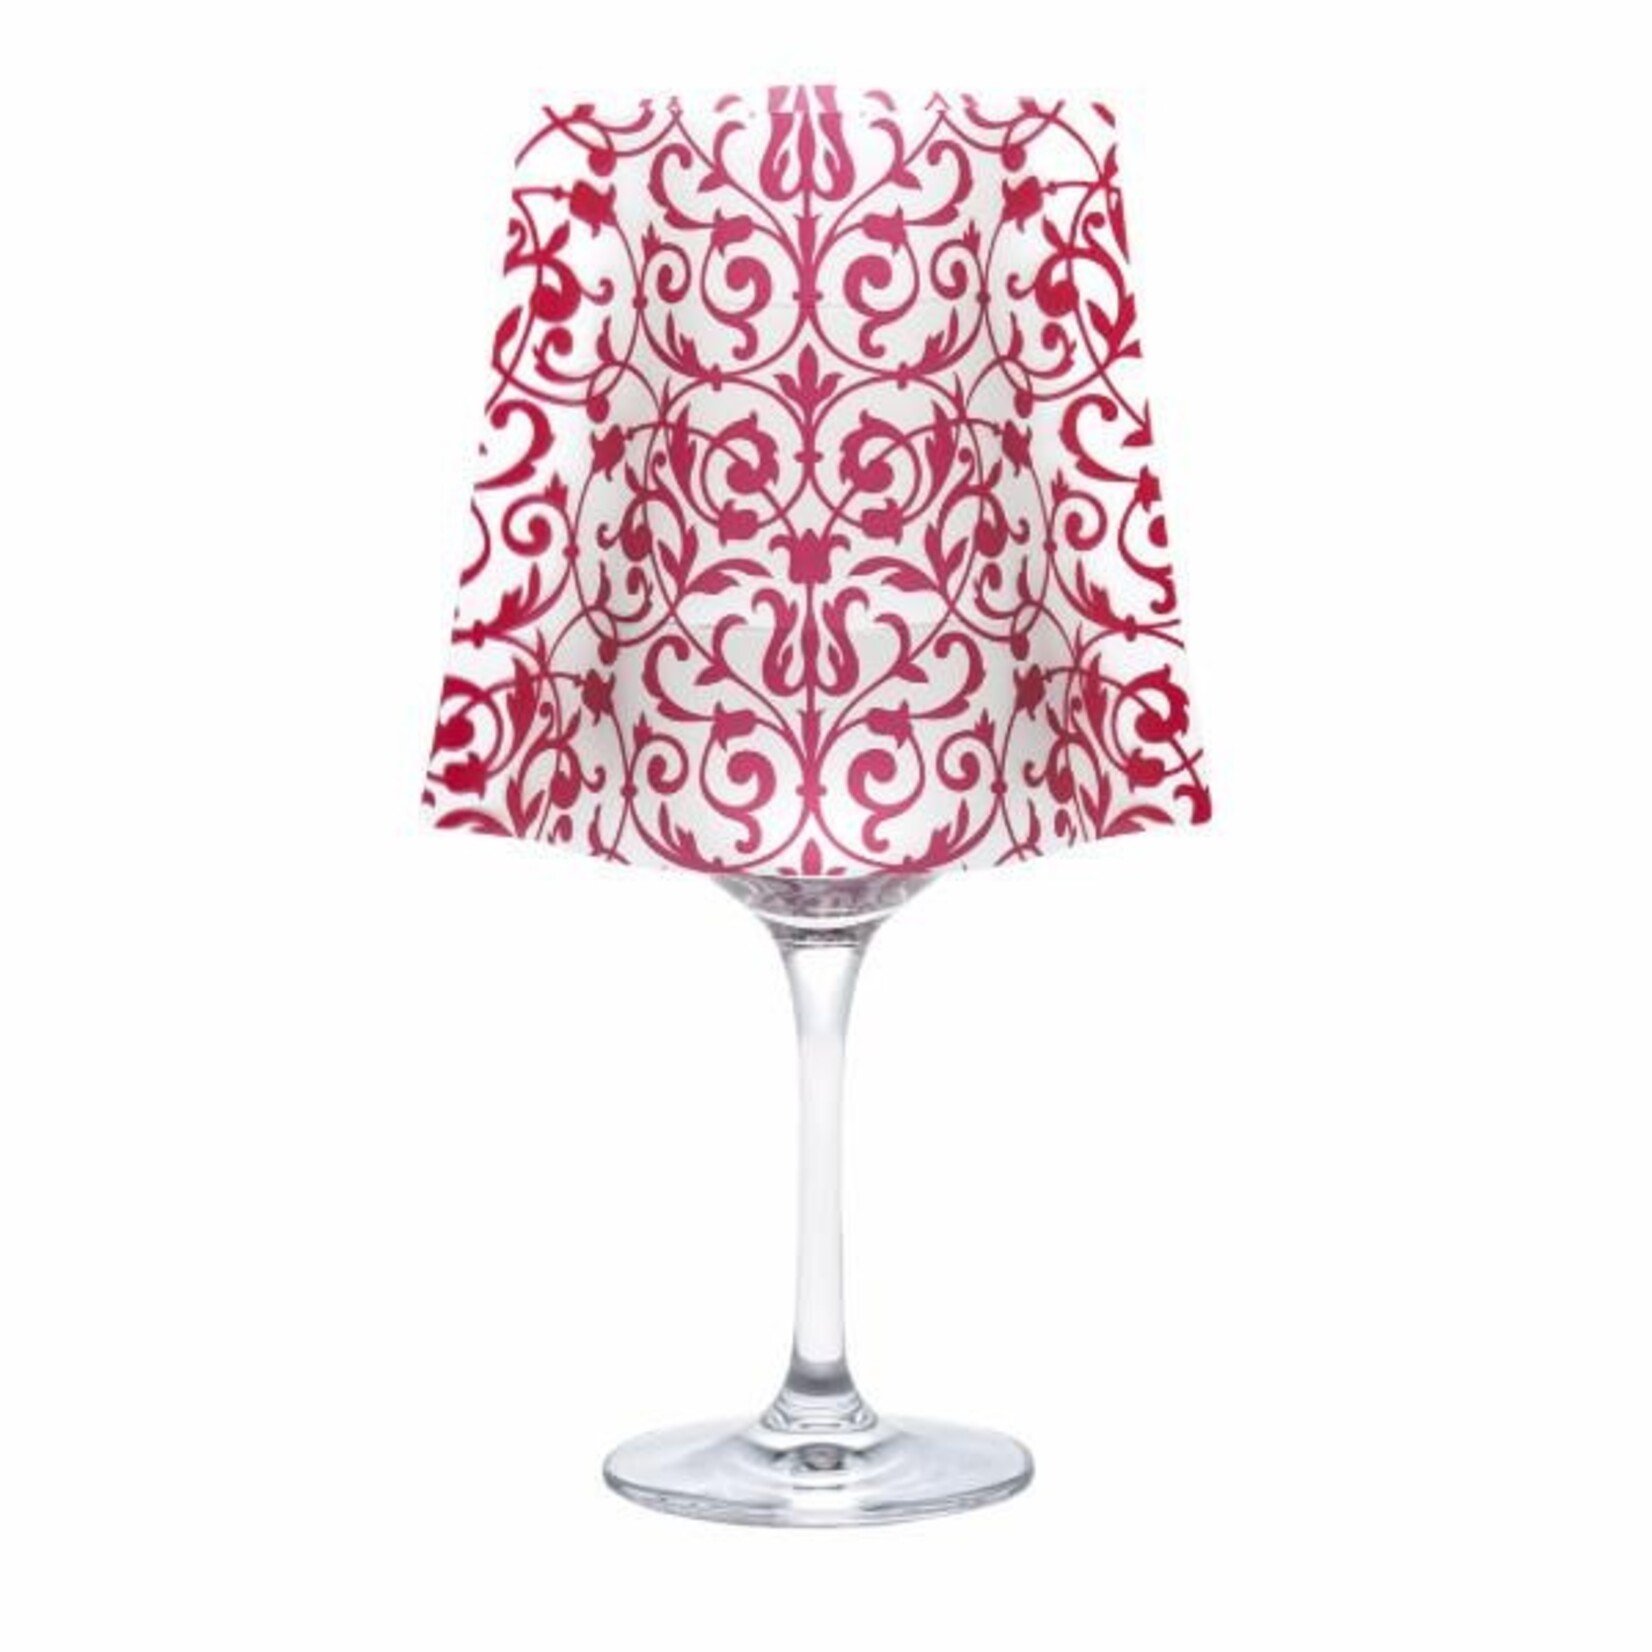 Modgy Modgy Wine Shades ChaCha Red